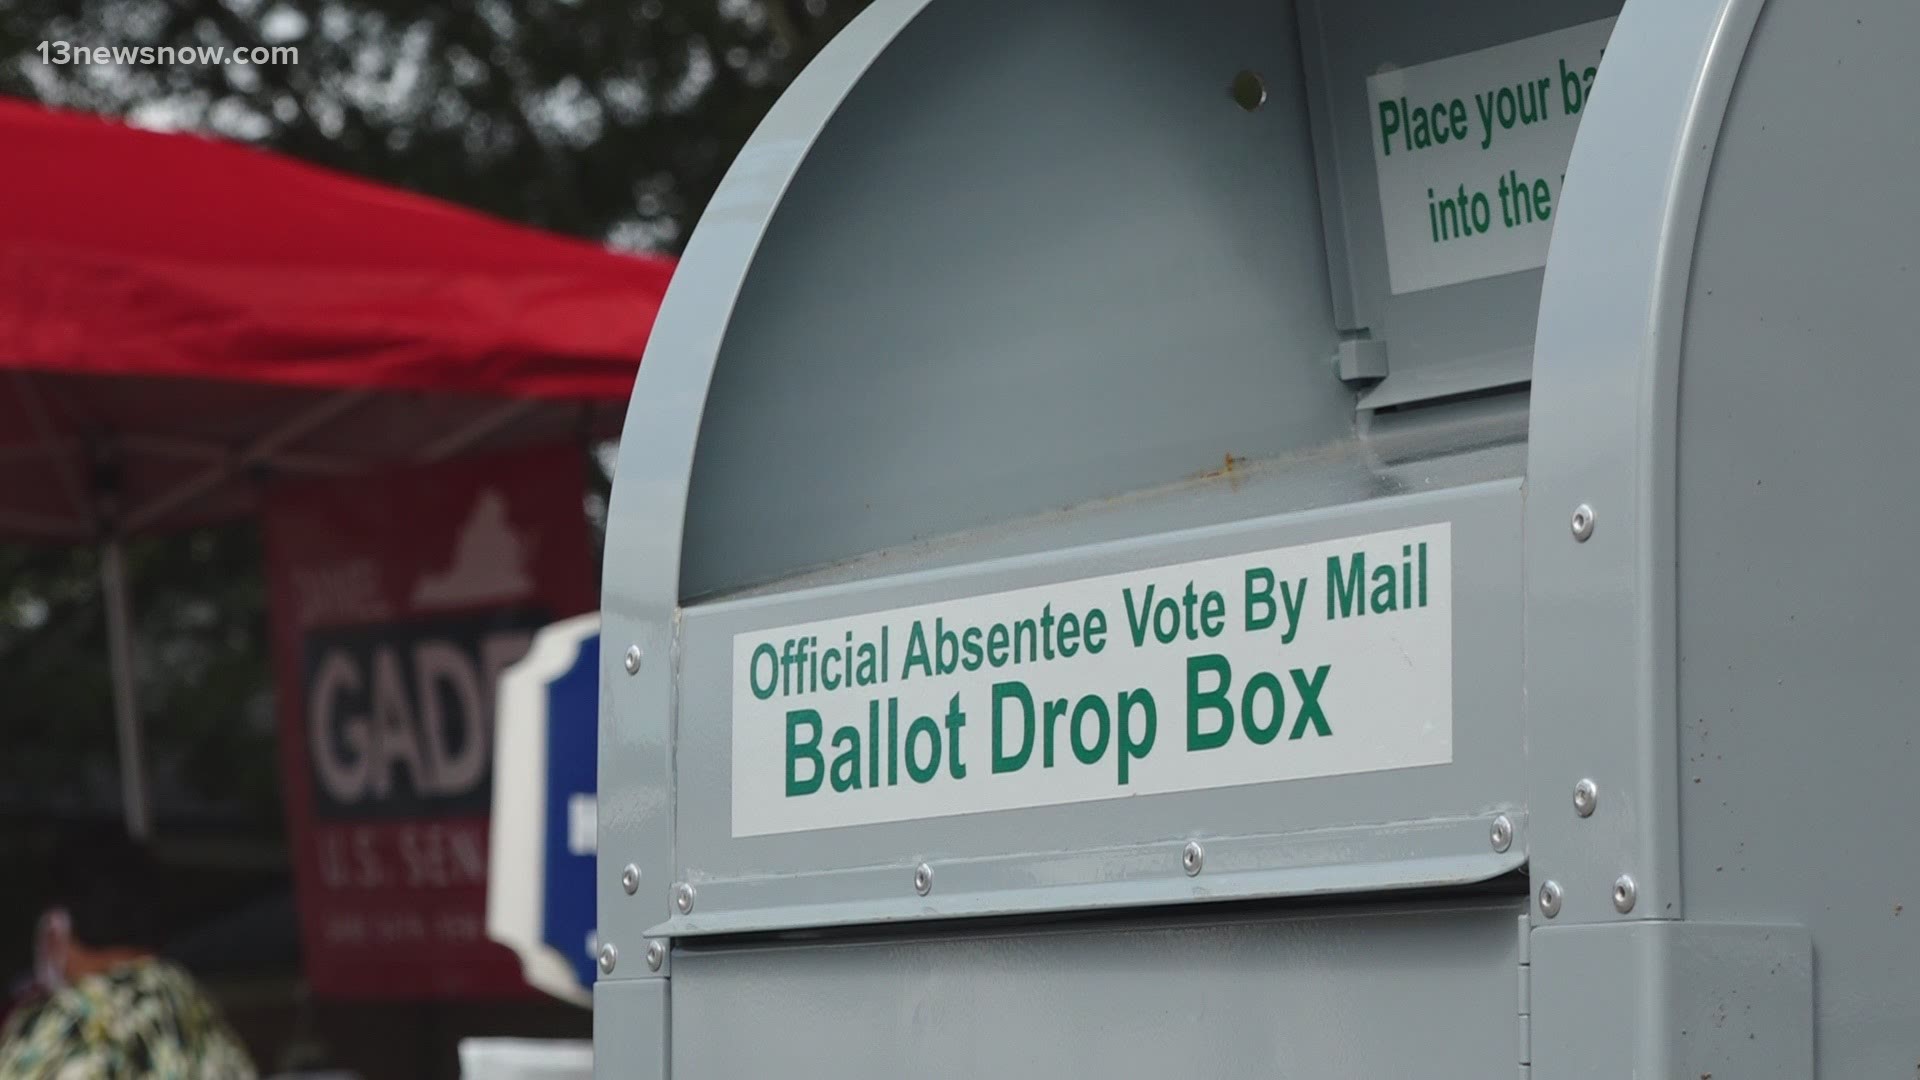 Election officials say new voting laws in the Commonwealth will help more people access early and mail-in voting.